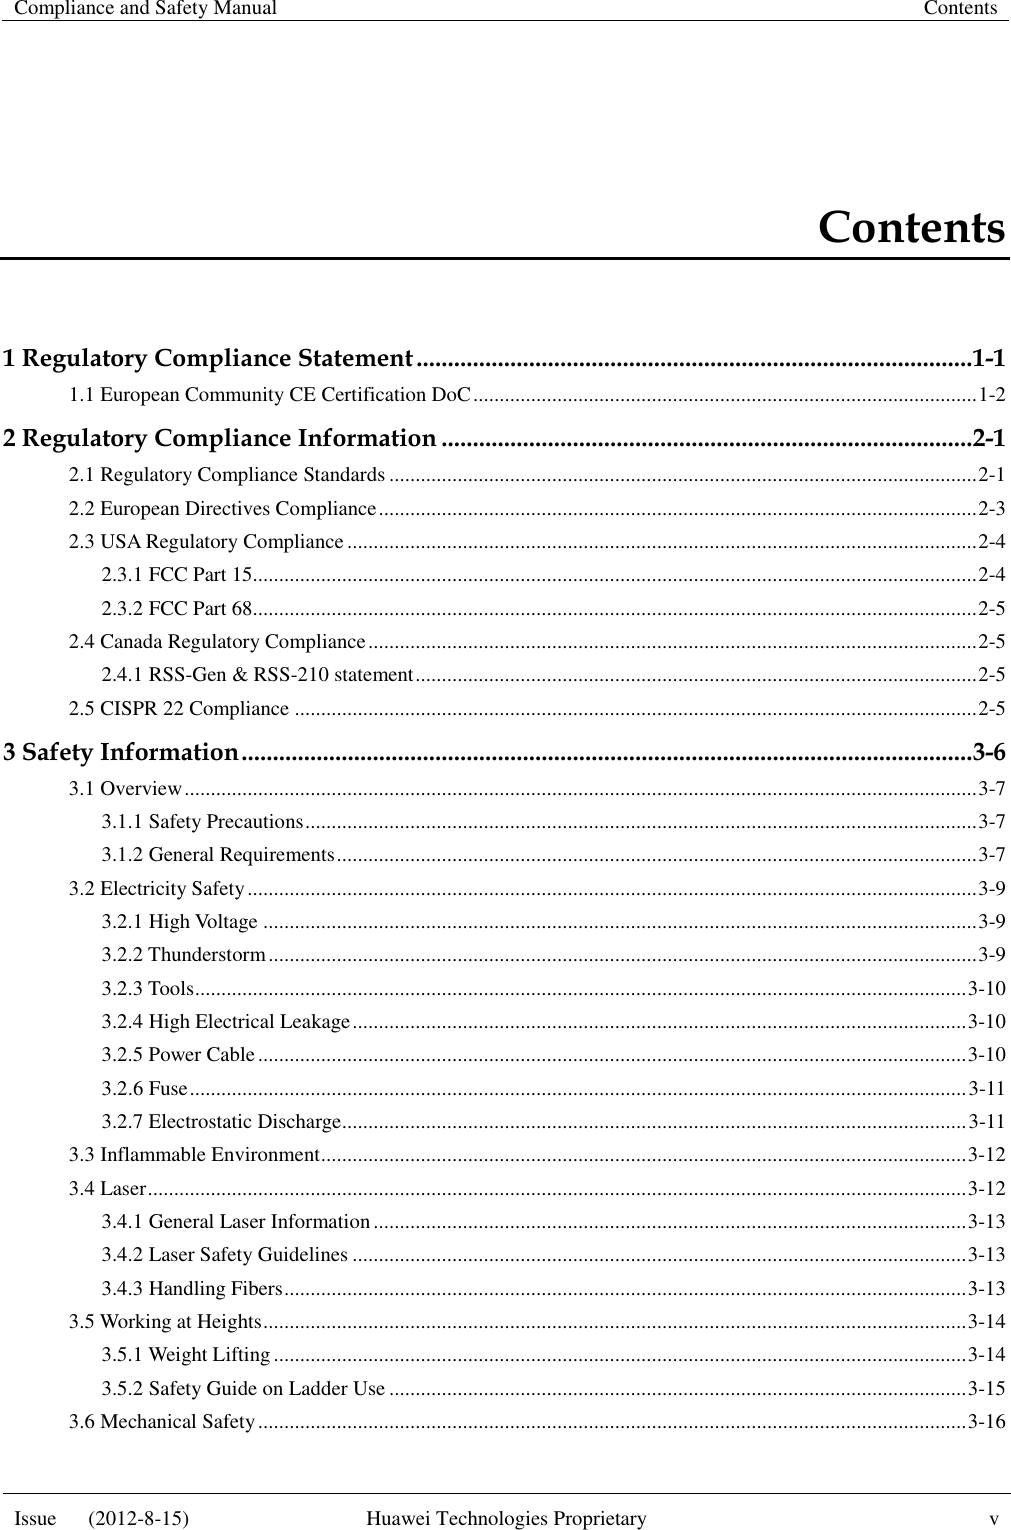 Compliance and Safety Manual Contents  Issue      (2012-8-15) Huawei Technologies Proprietary v  Contents 1 Regulatory Compliance Statement ......................................................................................... 1-1 1.1 European Community CE Certification DoC ................................................................................................ 1-2 2 Regulatory Compliance Information ..................................................................................... 2-1 2.1 Regulatory Compliance Standards ................................................................................................................ 2-1 2.2 European Directives Compliance .................................................................................................................. 2-3 2.3 USA Regulatory Compliance ........................................................................................................................ 2-4 2.3.1 FCC Part 15.......................................................................................................................................... 2-4 2.3.2 FCC Part 68.......................................................................................................................................... 2-5 2.4 Canada Regulatory Compliance .................................................................................................................... 2-5 2.4.1 RSS-Gen &amp; RSS-210 statement ........................................................................................................... 2-5 2.5 CISPR 22 Compliance .................................................................................................................................. 2-5 3 Safety Information ..................................................................................................................... 3-6 3.1 Overview ....................................................................................................................................................... 3-7 3.1.1 Safety Precautions ................................................................................................................................ 3-7 3.1.2 General Requirements .......................................................................................................................... 3-7 3.2 Electricity Safety ........................................................................................................................................... 3-9 3.2.1 High Voltage ........................................................................................................................................ 3-9 3.2.2 Thunderstorm ....................................................................................................................................... 3-9 3.2.3 Tools ................................................................................................................................................... 3-10 3.2.4 High Electrical Leakage ..................................................................................................................... 3-10 3.2.5 Power Cable ....................................................................................................................................... 3-10 3.2.6 Fuse .................................................................................................................................................... 3-11 3.2.7 Electrostatic Discharge....................................................................................................................... 3-11 3.3 Inflammable Environment ........................................................................................................................... 3-12 3.4 Laser ............................................................................................................................................................ 3-12 3.4.1 General Laser Information ................................................................................................................. 3-13 3.4.2 Laser Safety Guidelines ..................................................................................................................... 3-13 3.4.3 Handling Fibers .................................................................................................................................. 3-13 3.5 Working at Heights ...................................................................................................................................... 3-14 3.5.1 Weight Lifting .................................................................................................................................... 3-14 3.5.2 Safety Guide on Ladder Use .............................................................................................................. 3-15 3.6 Mechanical Safety ....................................................................................................................................... 3-16 